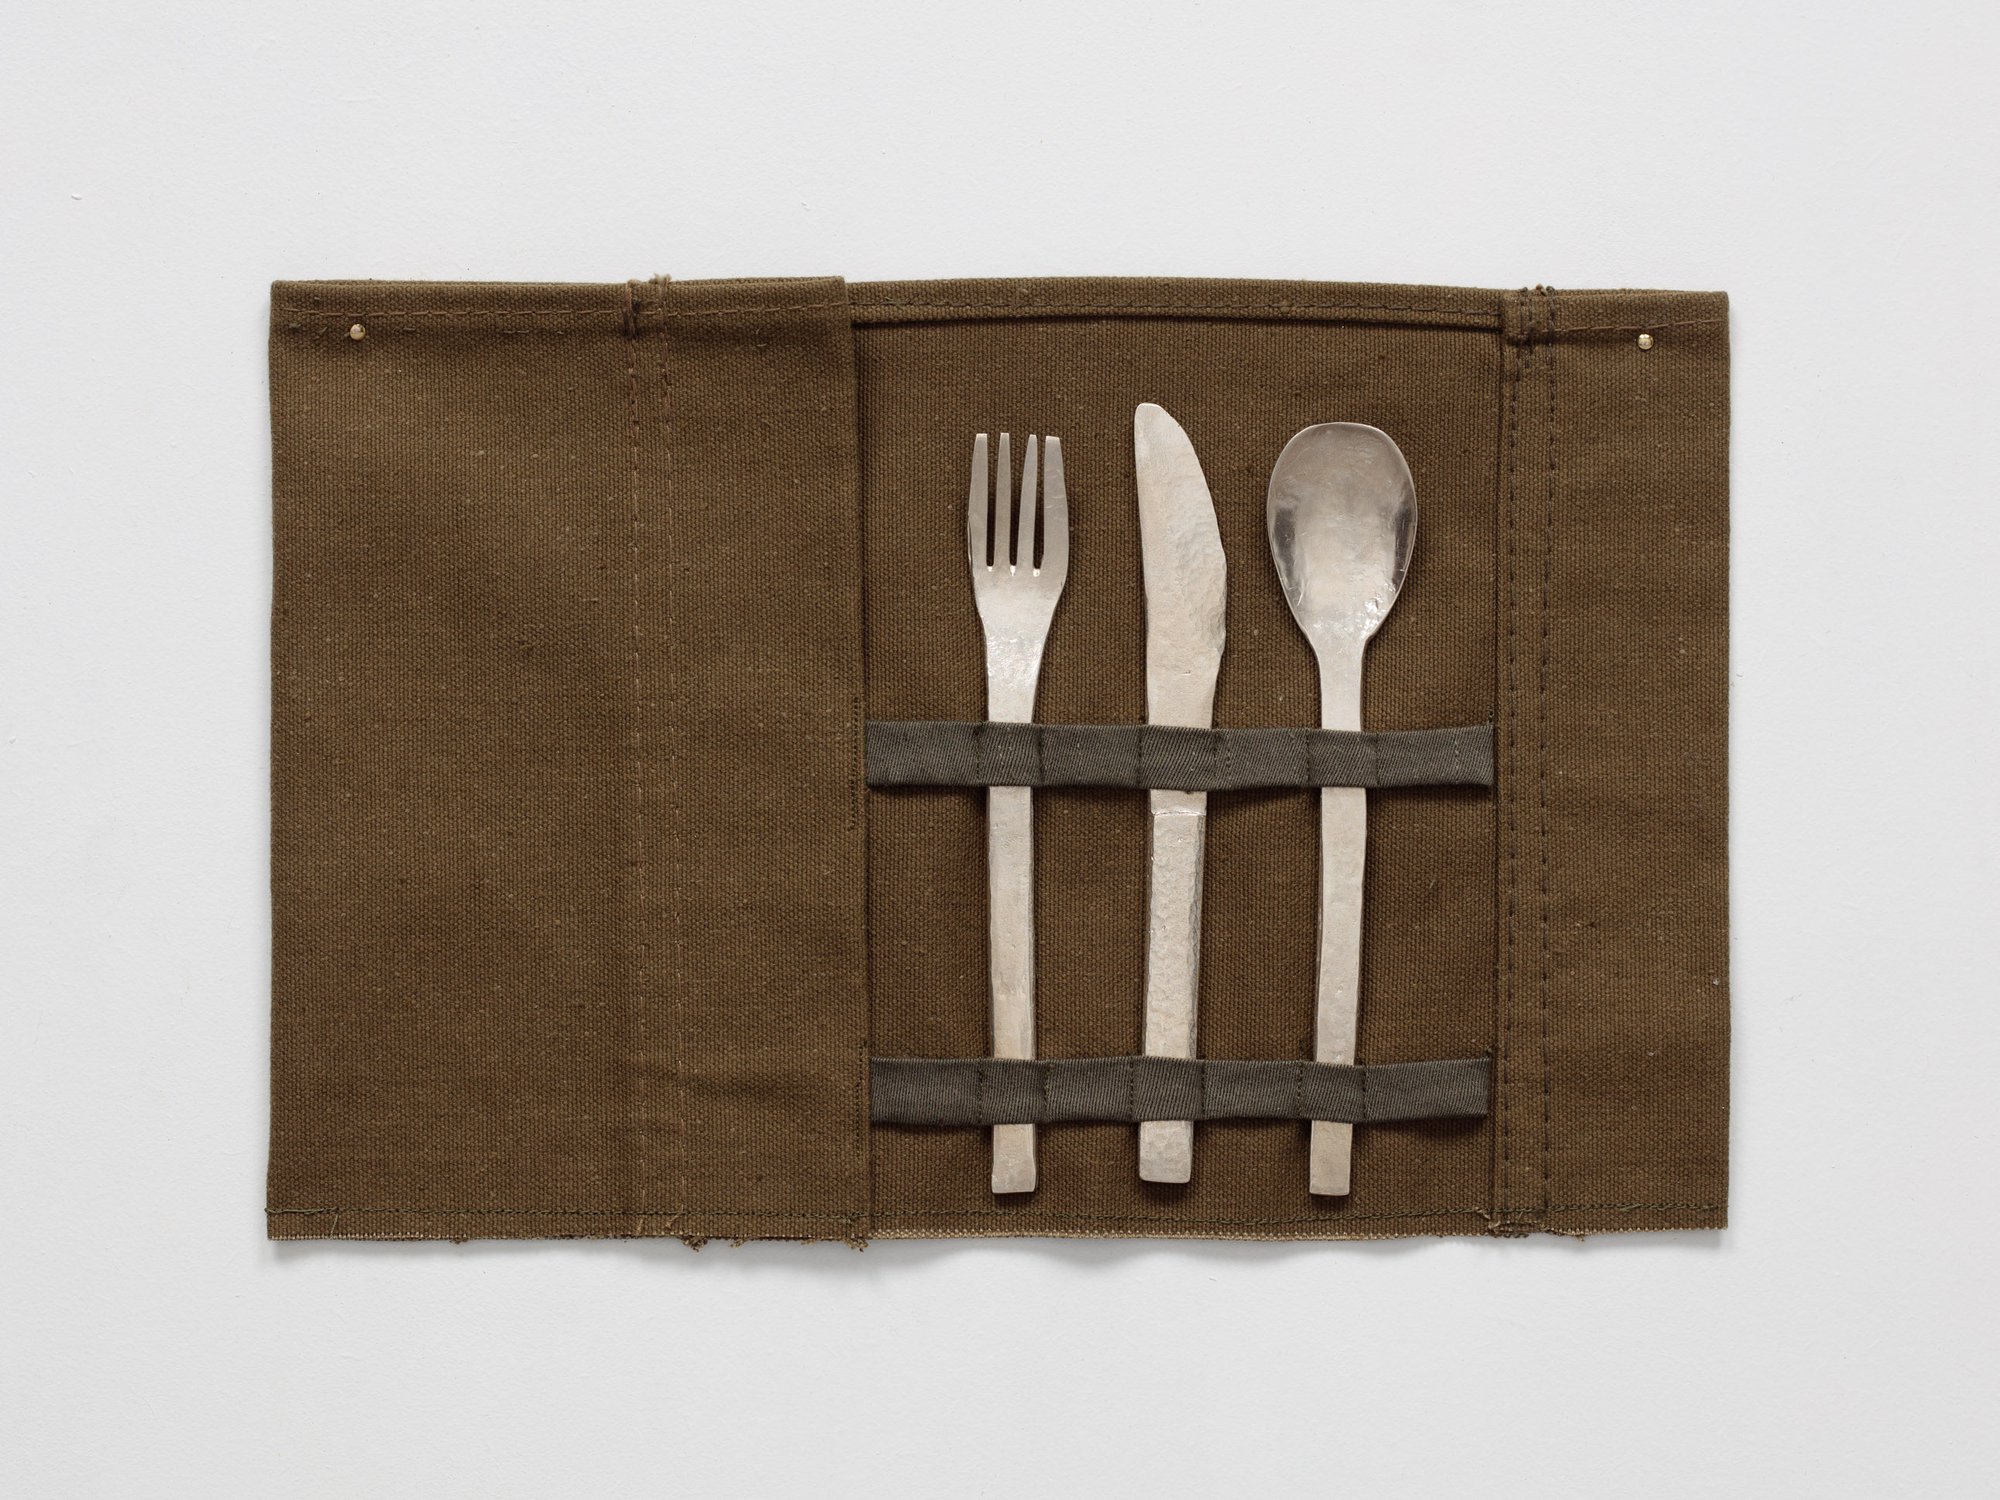 Sidsel Meineche Hansen, home vs owner, cutlery cast in silver, fabric support made by Louis Backhouse, 25 x 43 cm (9 7/8 x 16 7/8 in), 2020